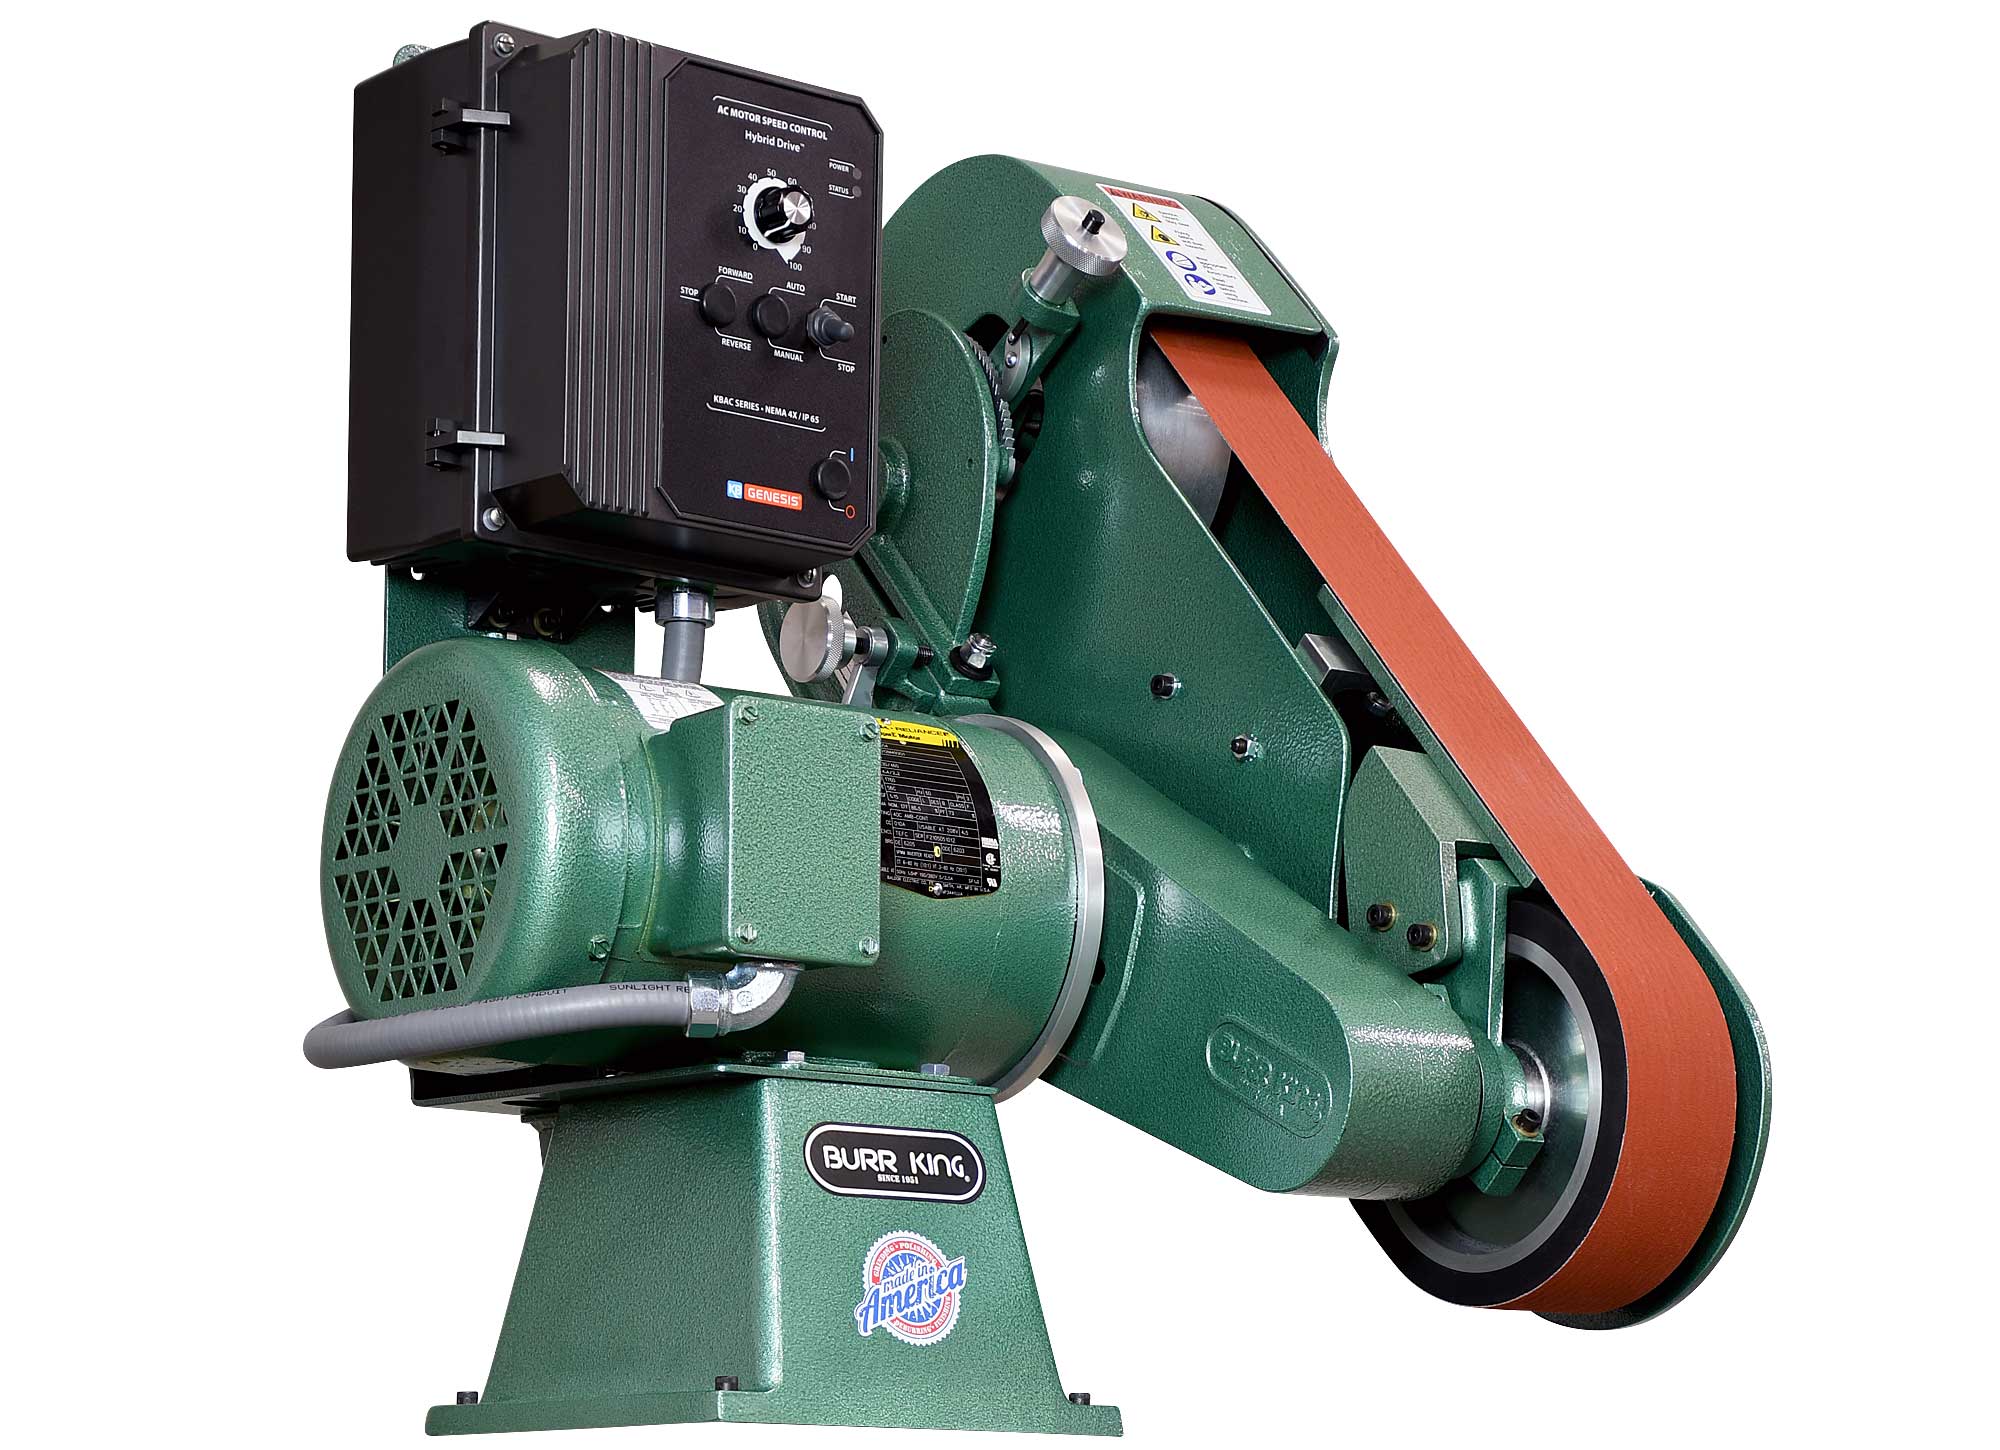 92110 variable speed Burr King belt grinder features a 2.5` x 60` belt and a powerful 1.5 HP motor